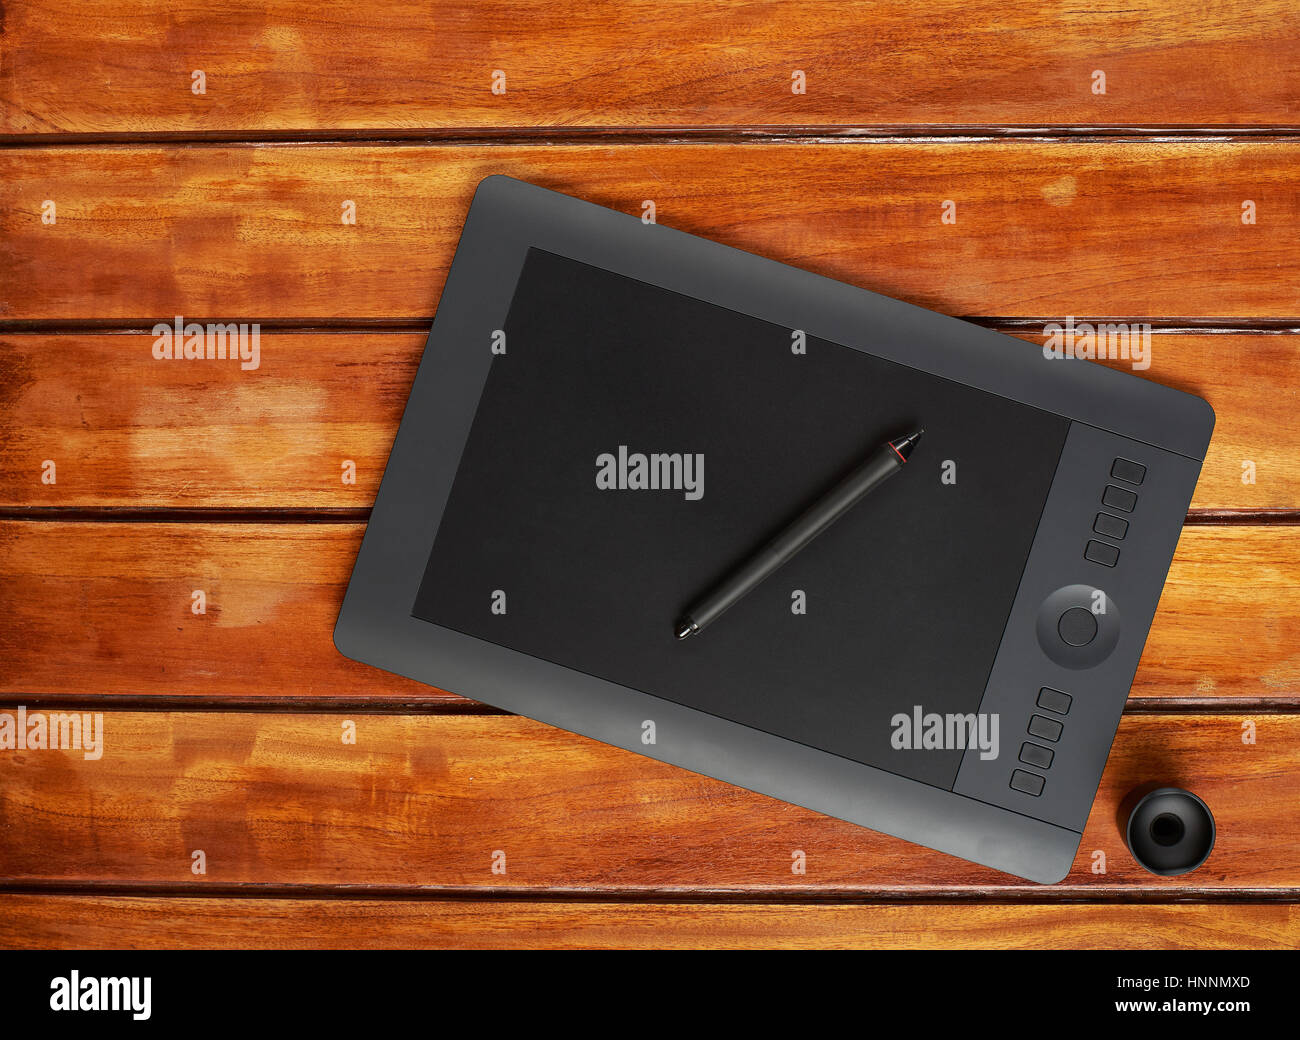 Graphic design tablet on wooden brown table view above Stock Photo